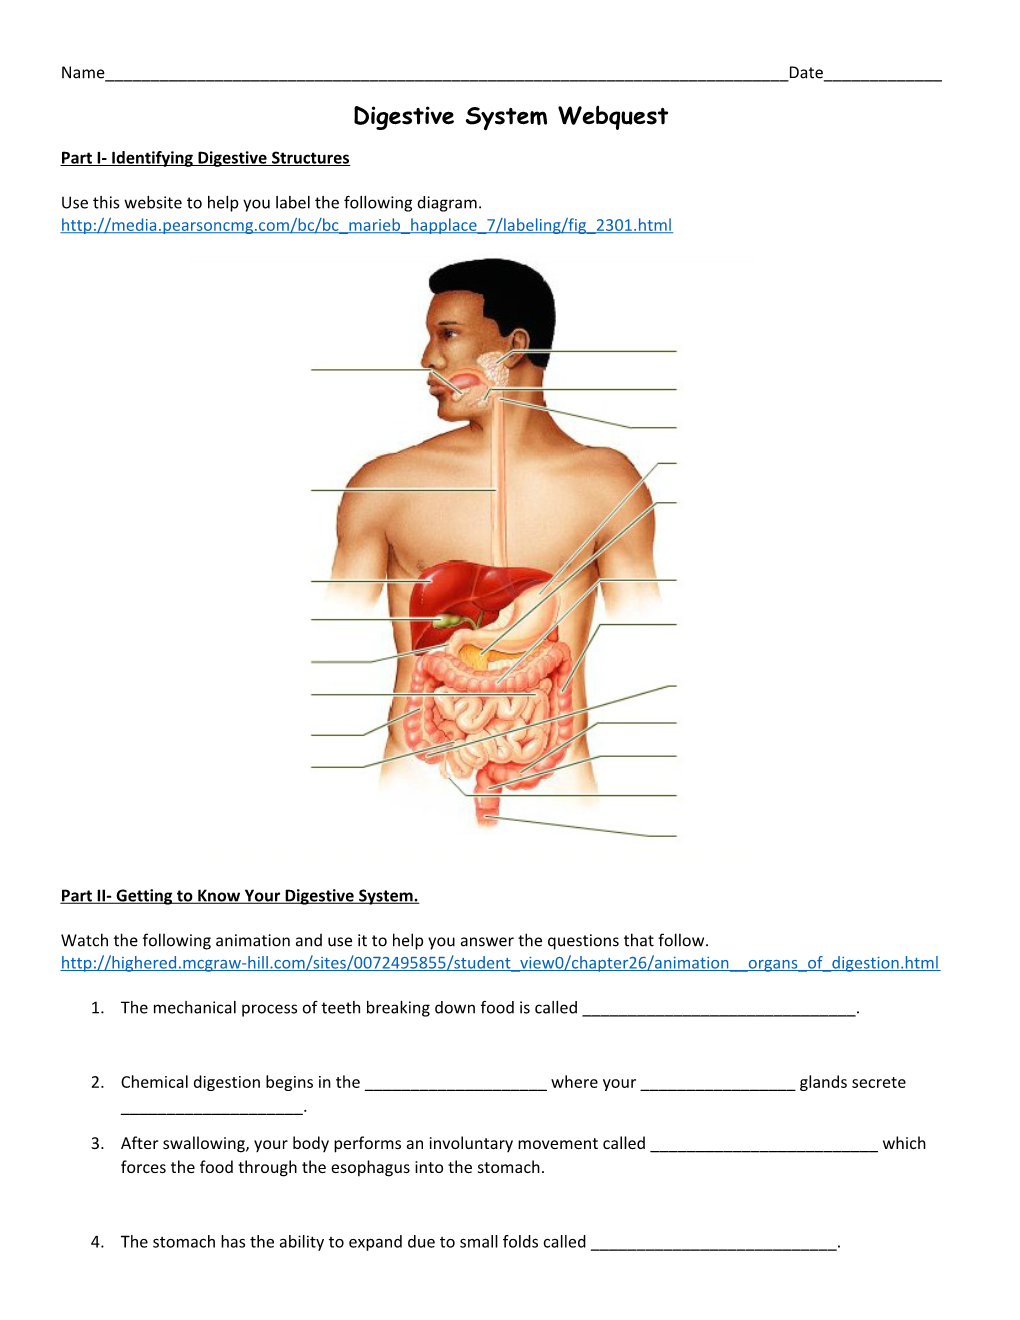 Part I- Identifying Digestive Structures